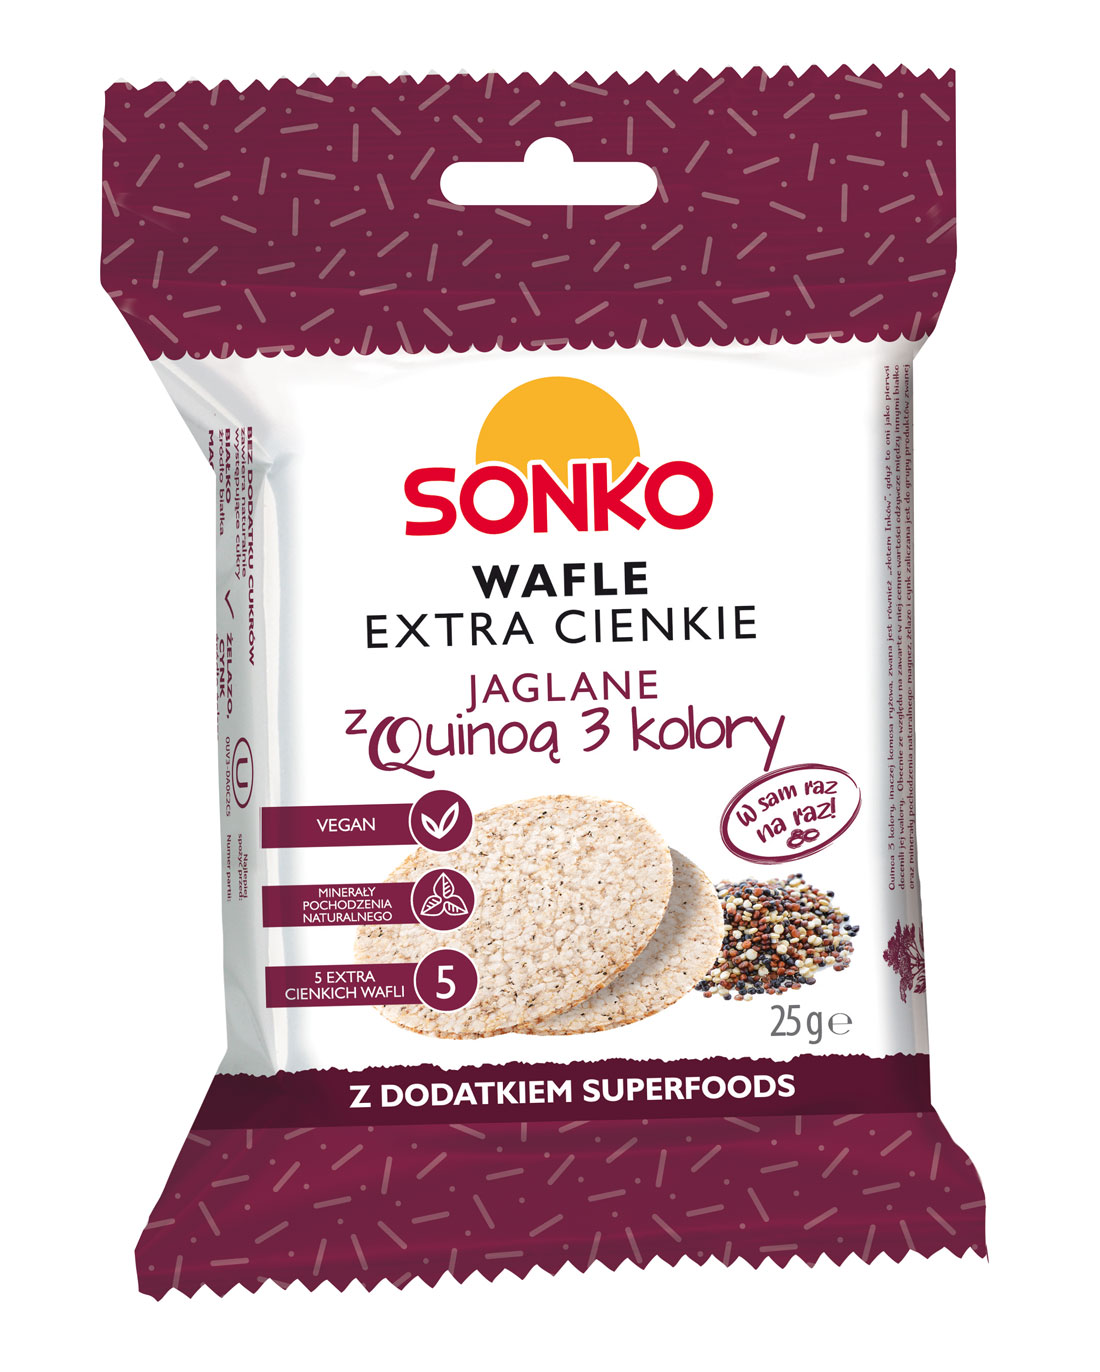 Sonko Extra thin Wafers Millet with Quinoa 3 цвета